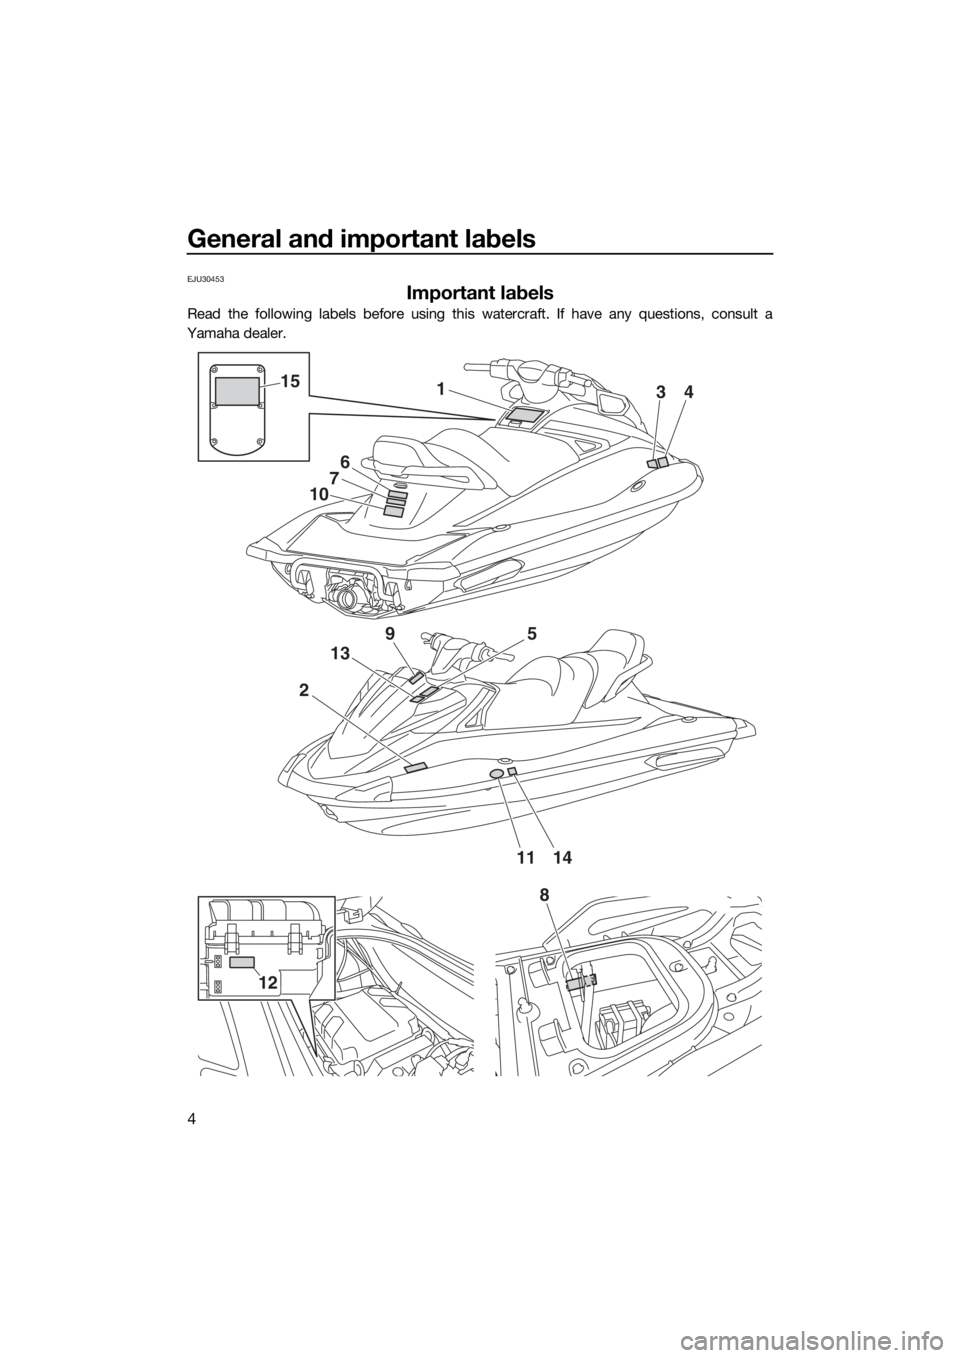 YAMAHA VX 2019  Owners Manual General and important labels
4
EJU30453
Important labels
Read the following labels before using this watercraft. If have any questions, consult a
Yamaha dealer.
2
9
13
1
6
7
10
34
5
1411
15
8
12
UF4G7